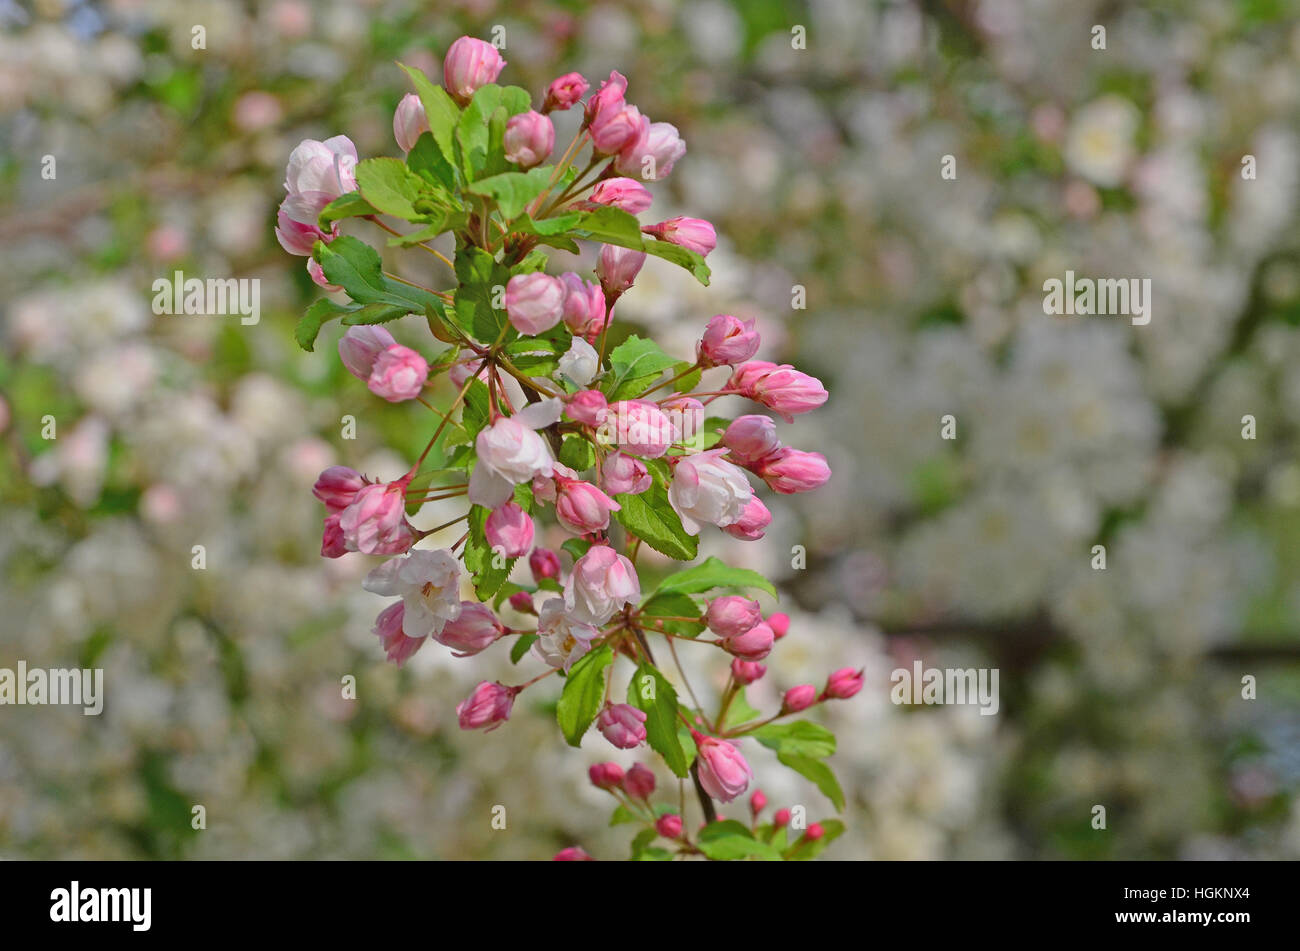 A sprig of crab apple (malus) blossoms belongs to a small deciduous blooming tree that are harbingers of an early spring. Stock Photo